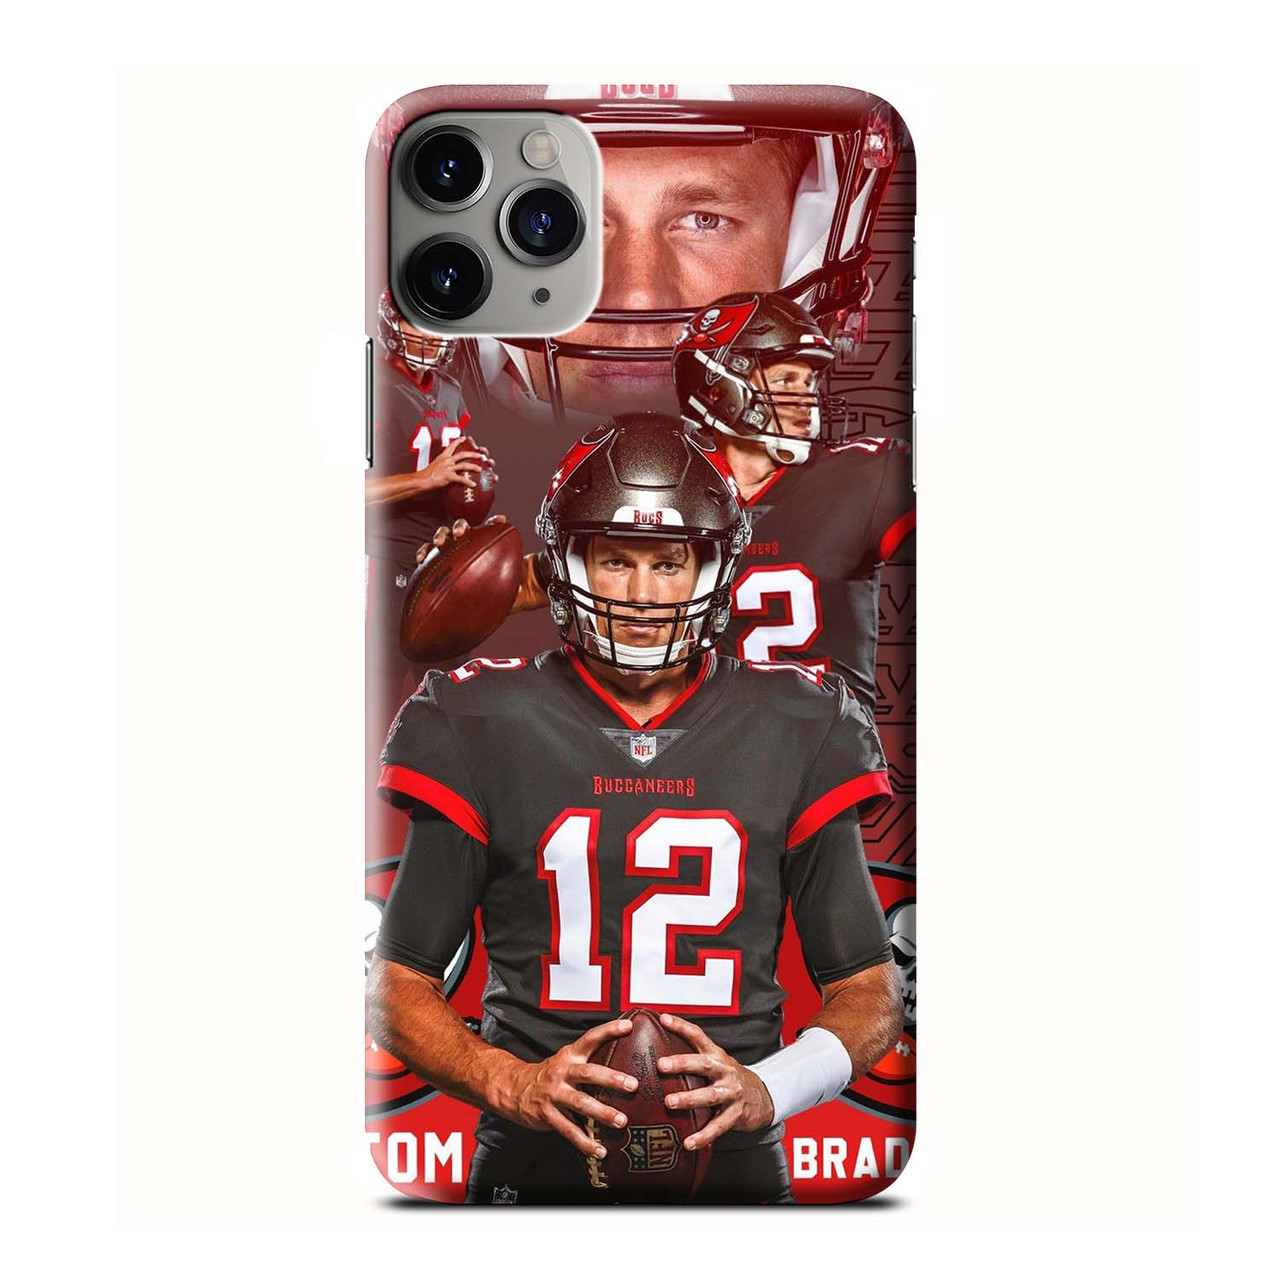 TOM BRADY 12 TAMPA BAY BUCCANEERS iPhone 3D Case Cover